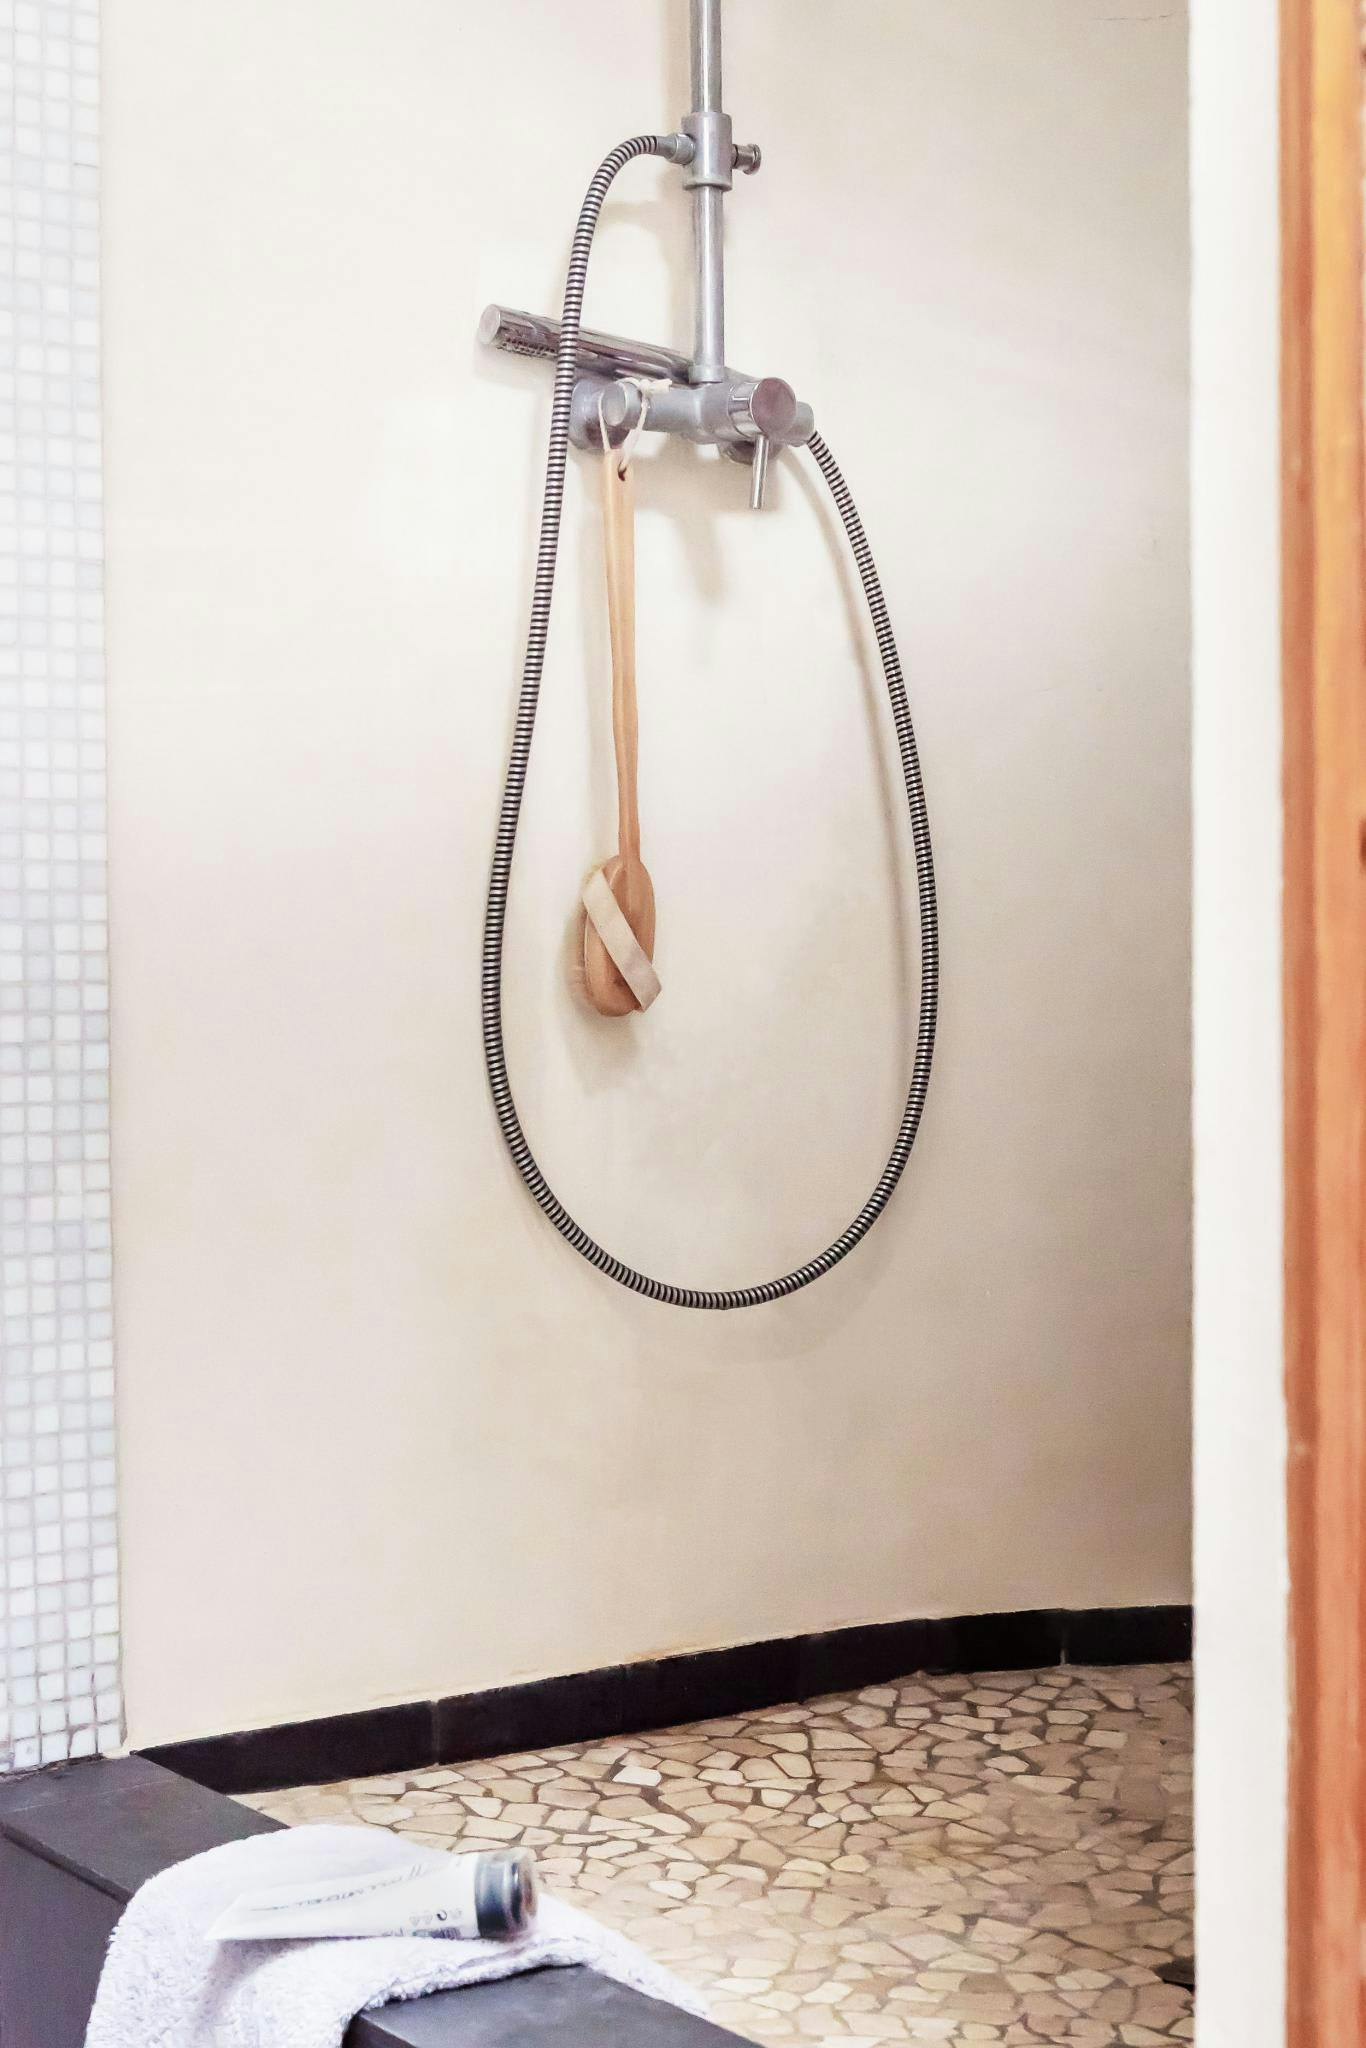 The image features a bathroom with a shower stall, a shower head, and a shower curtain.